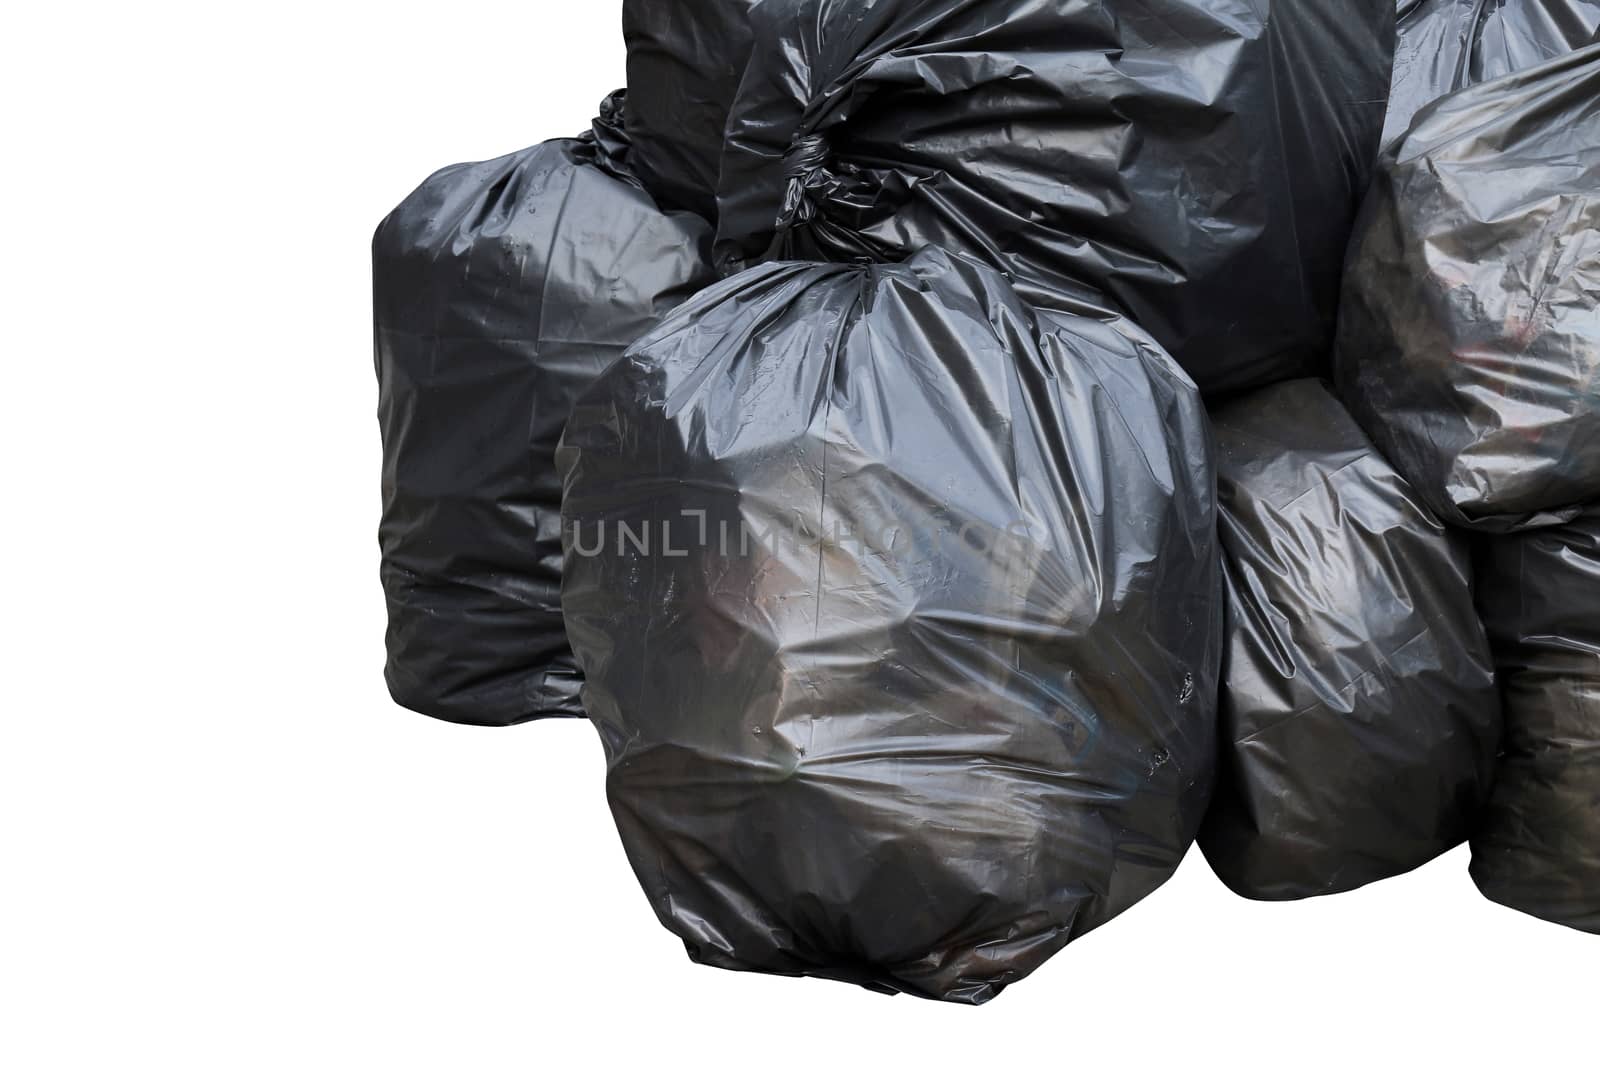 waste, black garbage bags plastic pile stack isolated on white background by cgdeaw